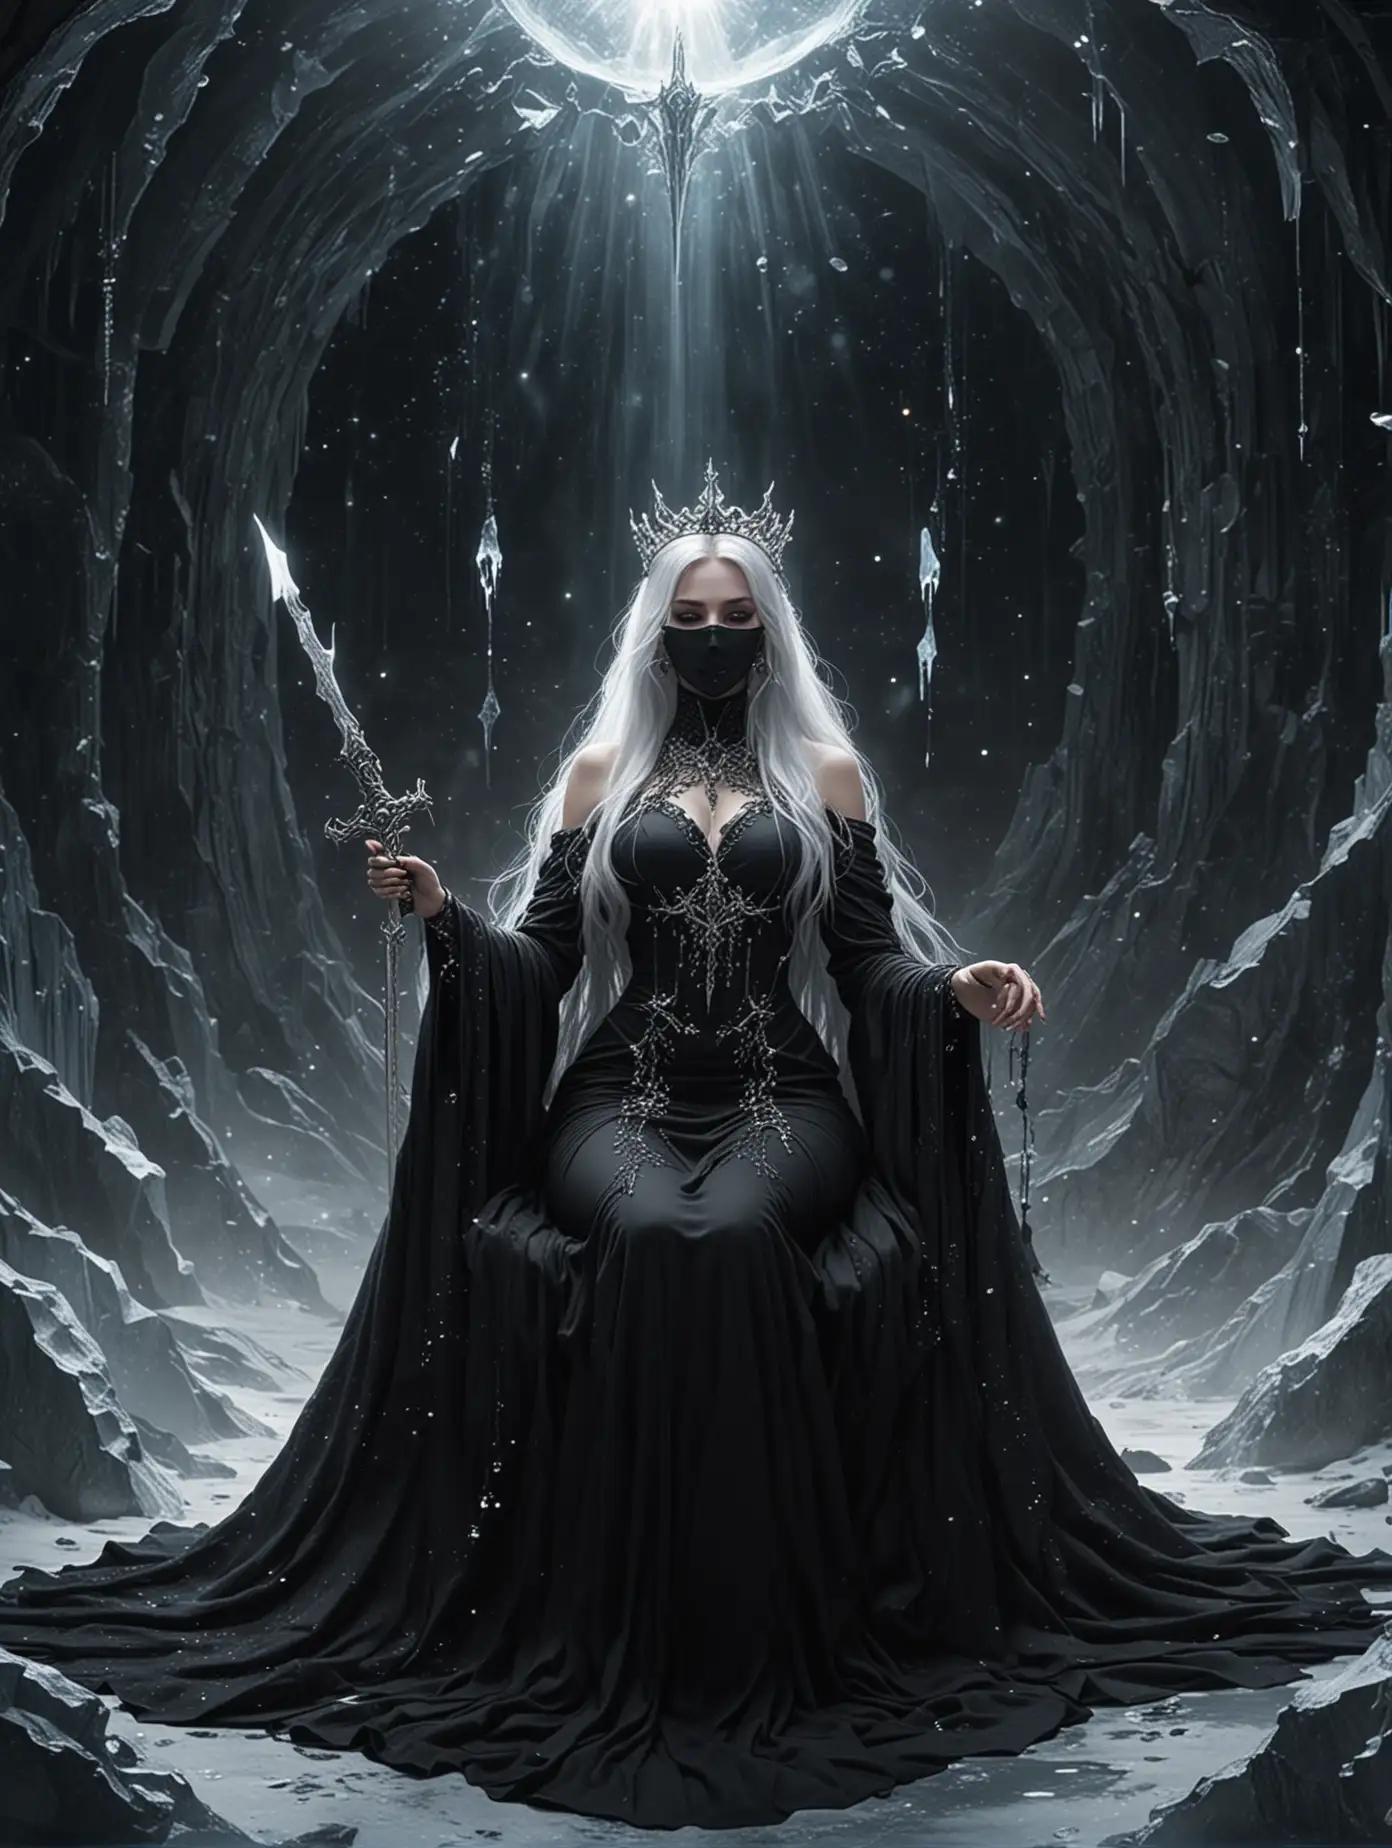 Ice-Goddess-on-Cosmic-Throne-with-Sword-and-Mask